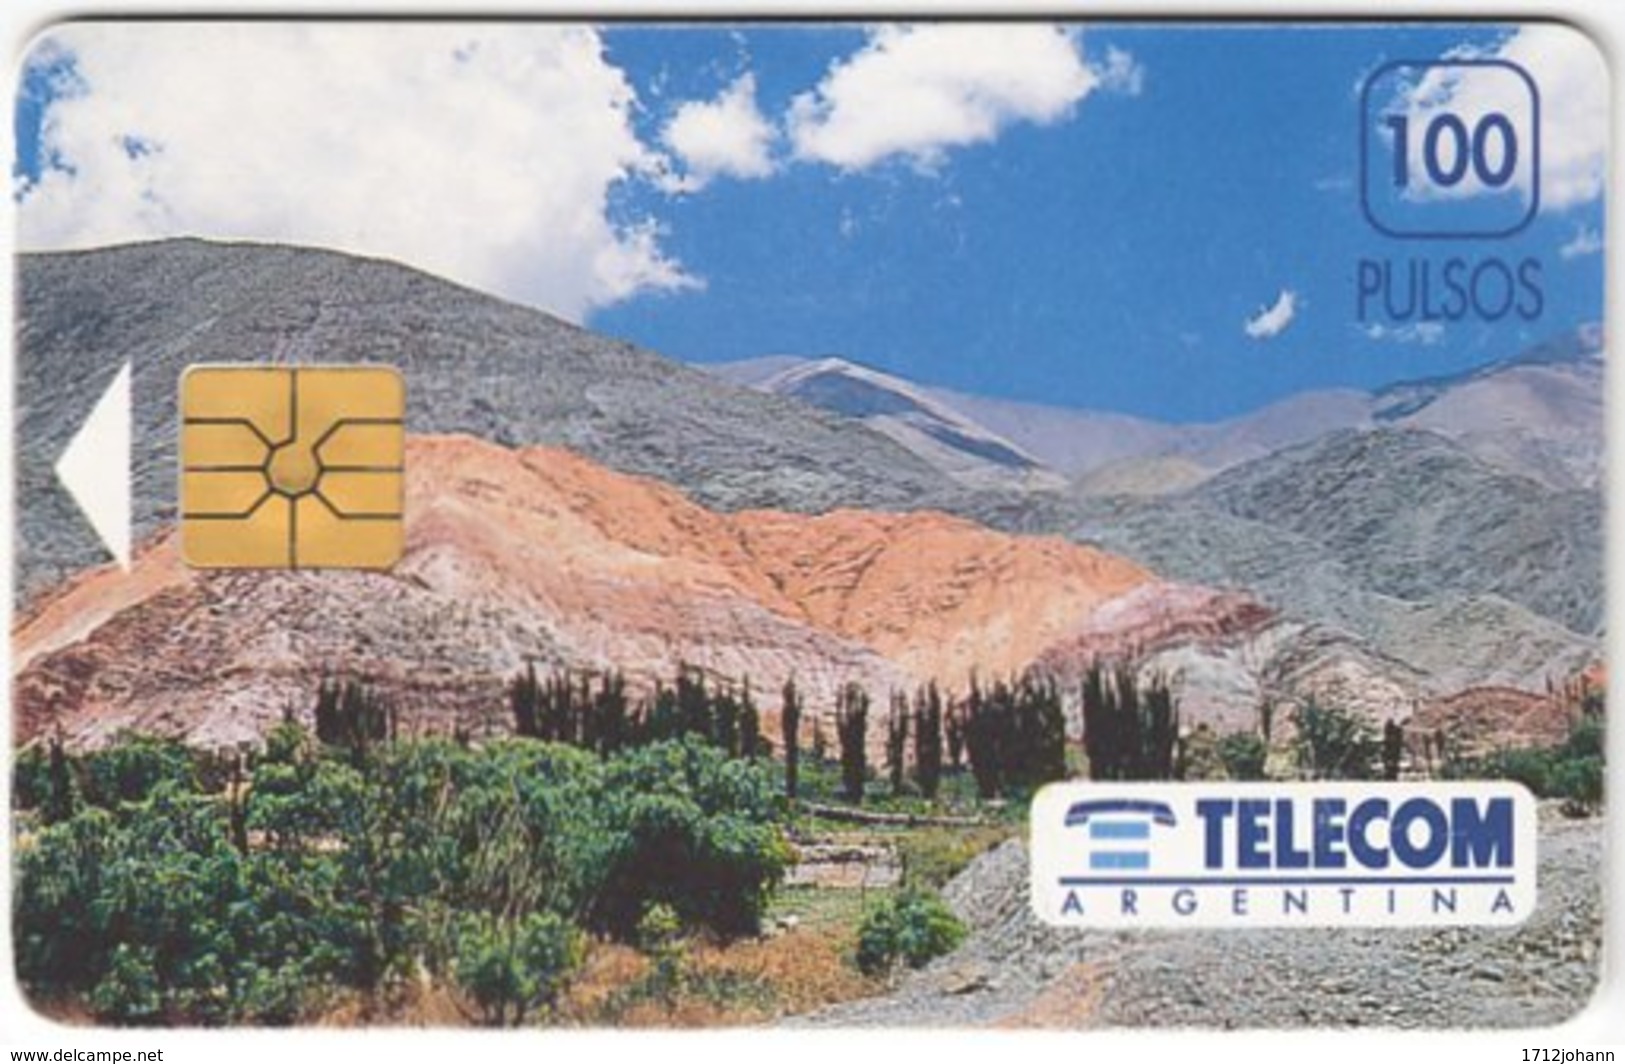 ARGENTINIA A-391 Chip Telecom - Landscape, Mountain - Used - Argentina